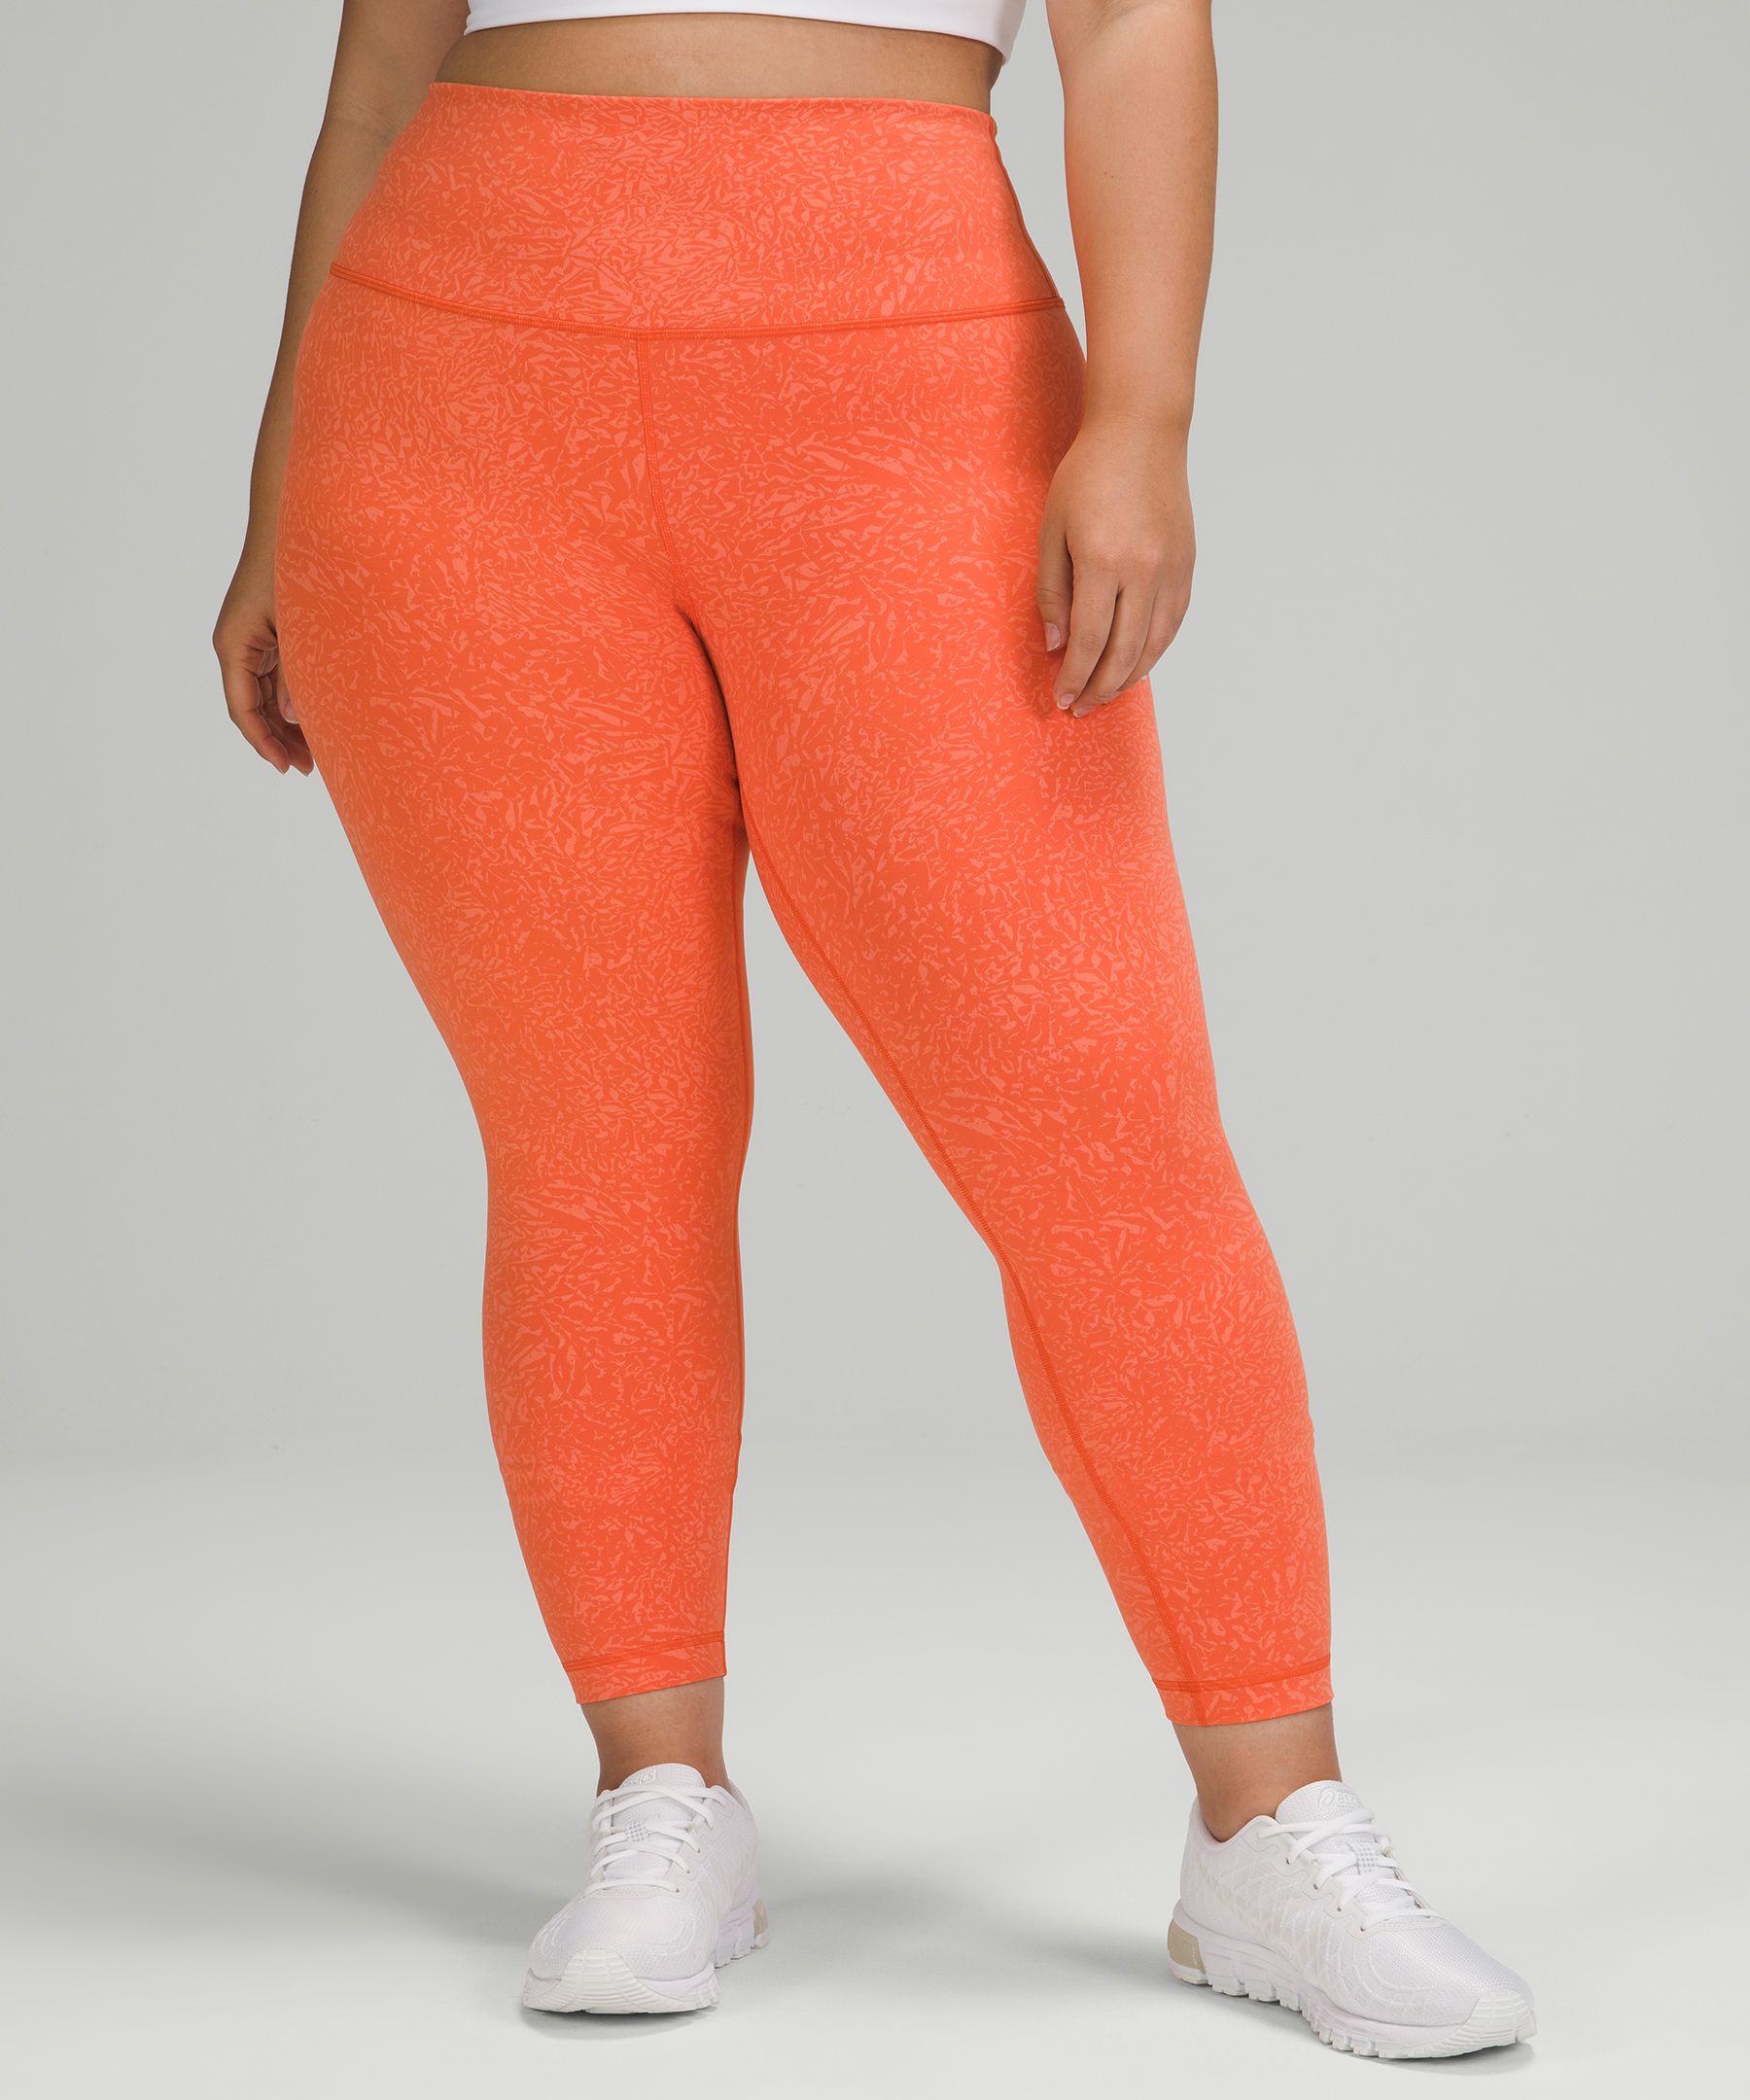 Lululemon Wunder Train High-rise Tights 25" In Crunch Warm Coral